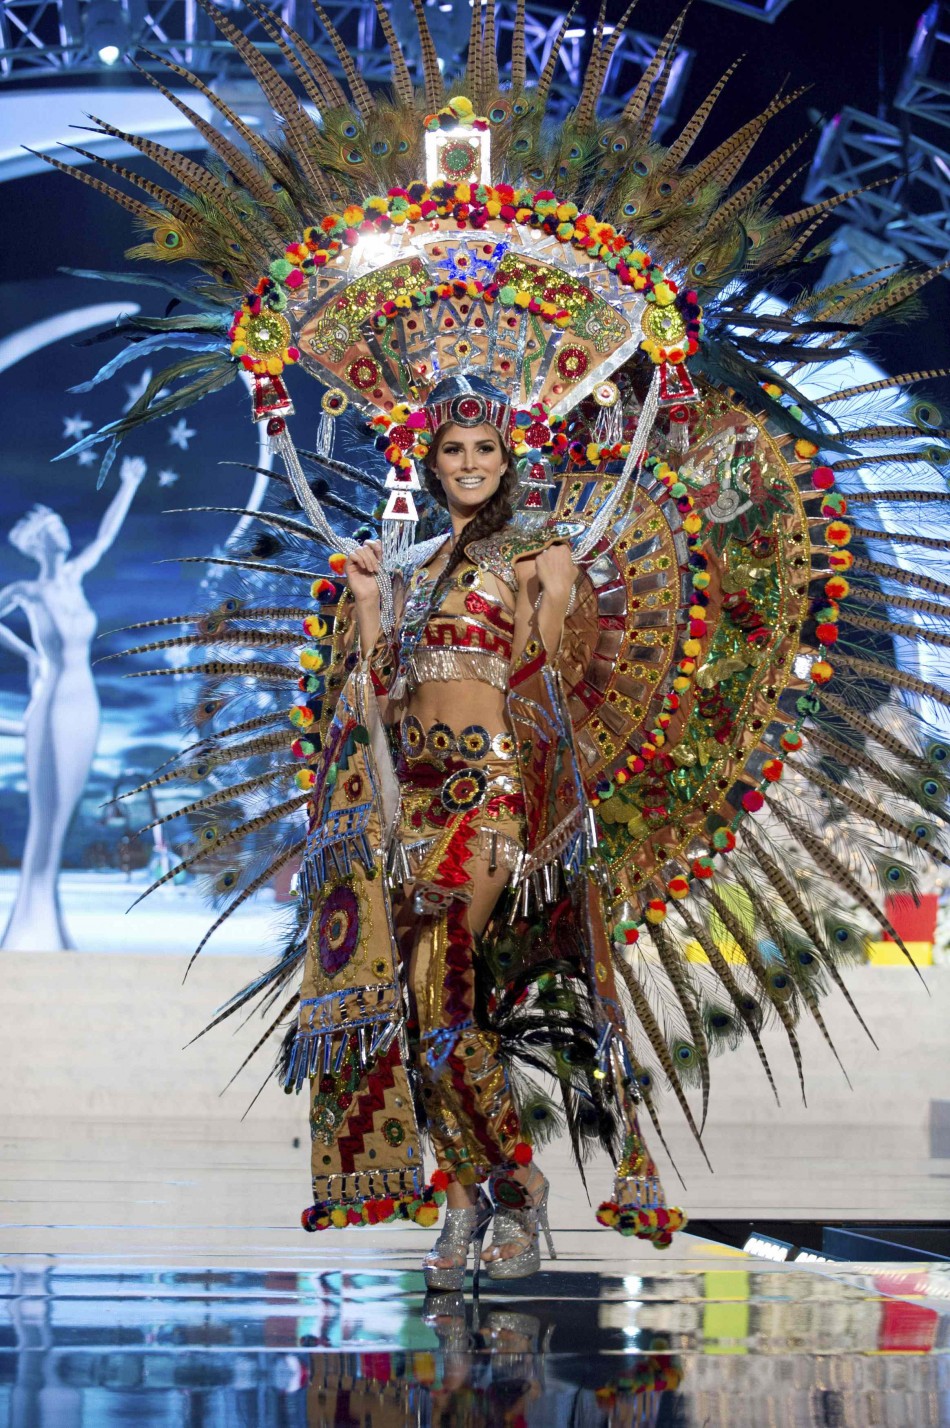 Miss Mexico Karina Gonzalez on stage at the 2012 Miss Universe National Costume Show at PH Live in Las Vegas